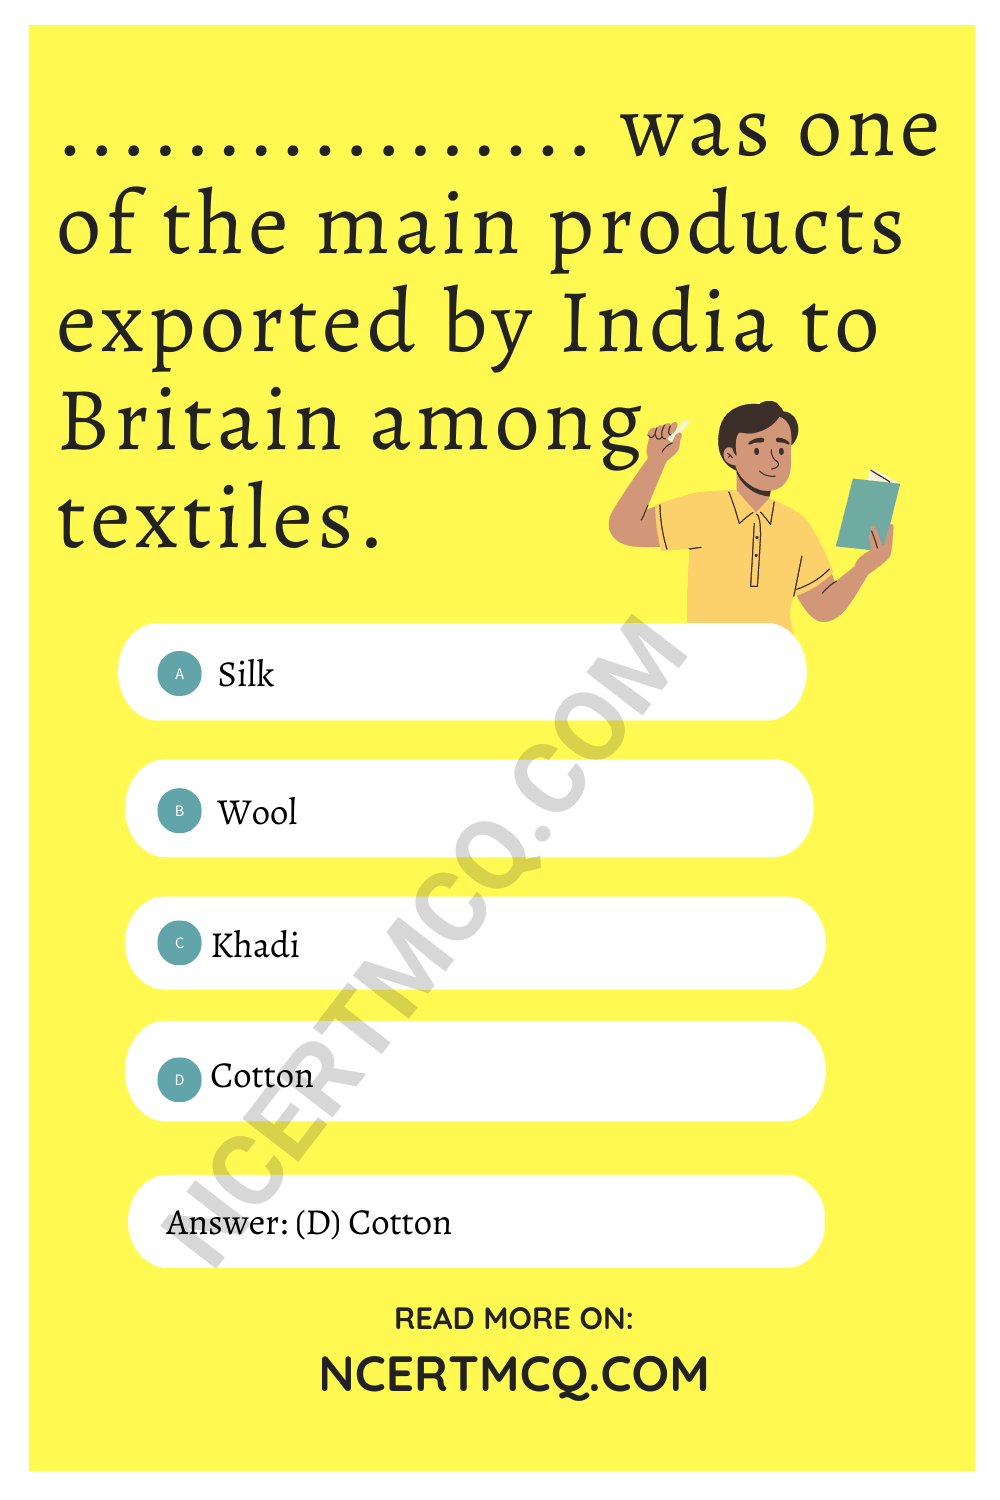 ................. was one of the main products exported by India to Britain among textiles.